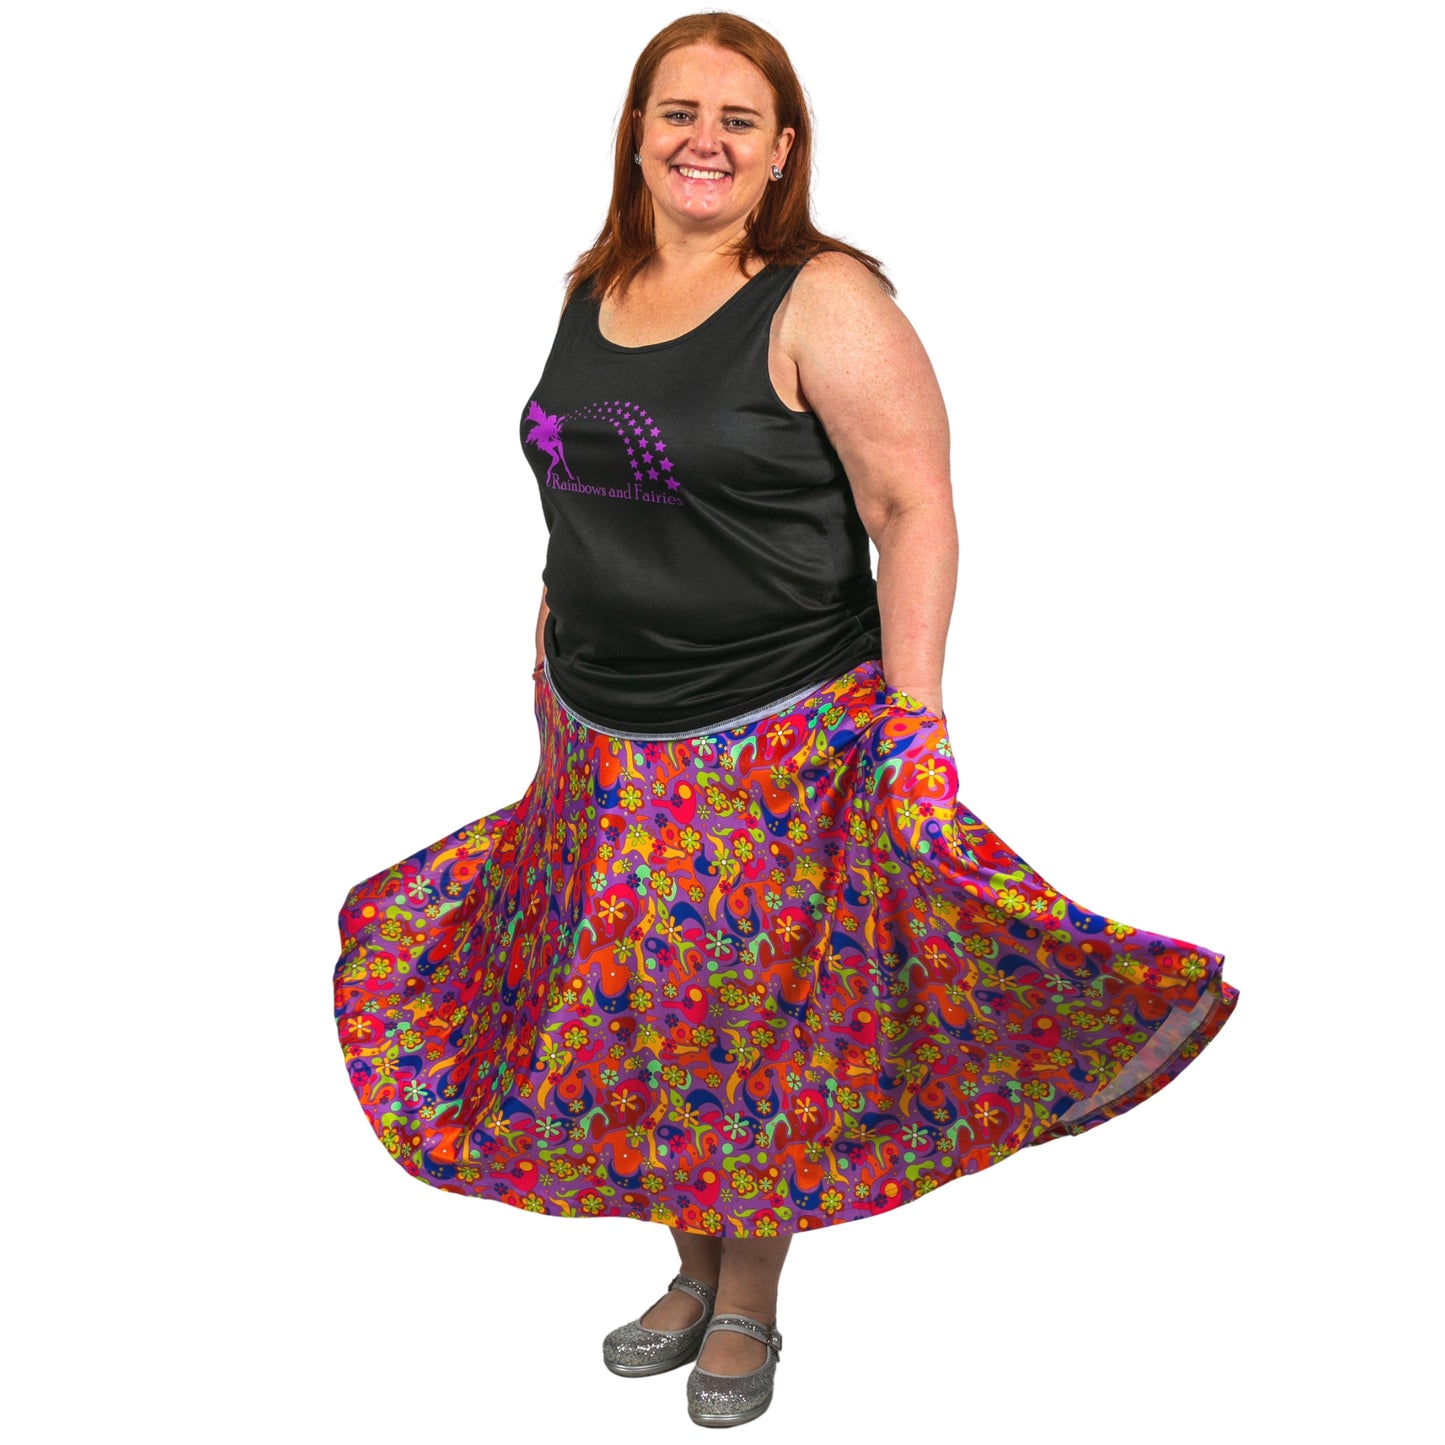 Flower Power Swishy Skirt by RainbowsAndFairies.com.au (Floral Print - Woodstock - Psychedelic - Circle Skirt - Kitsch - Retro - Skirt With Pockets) - SKU: CL_SWISH_FLOPO_ORG - Pic-04